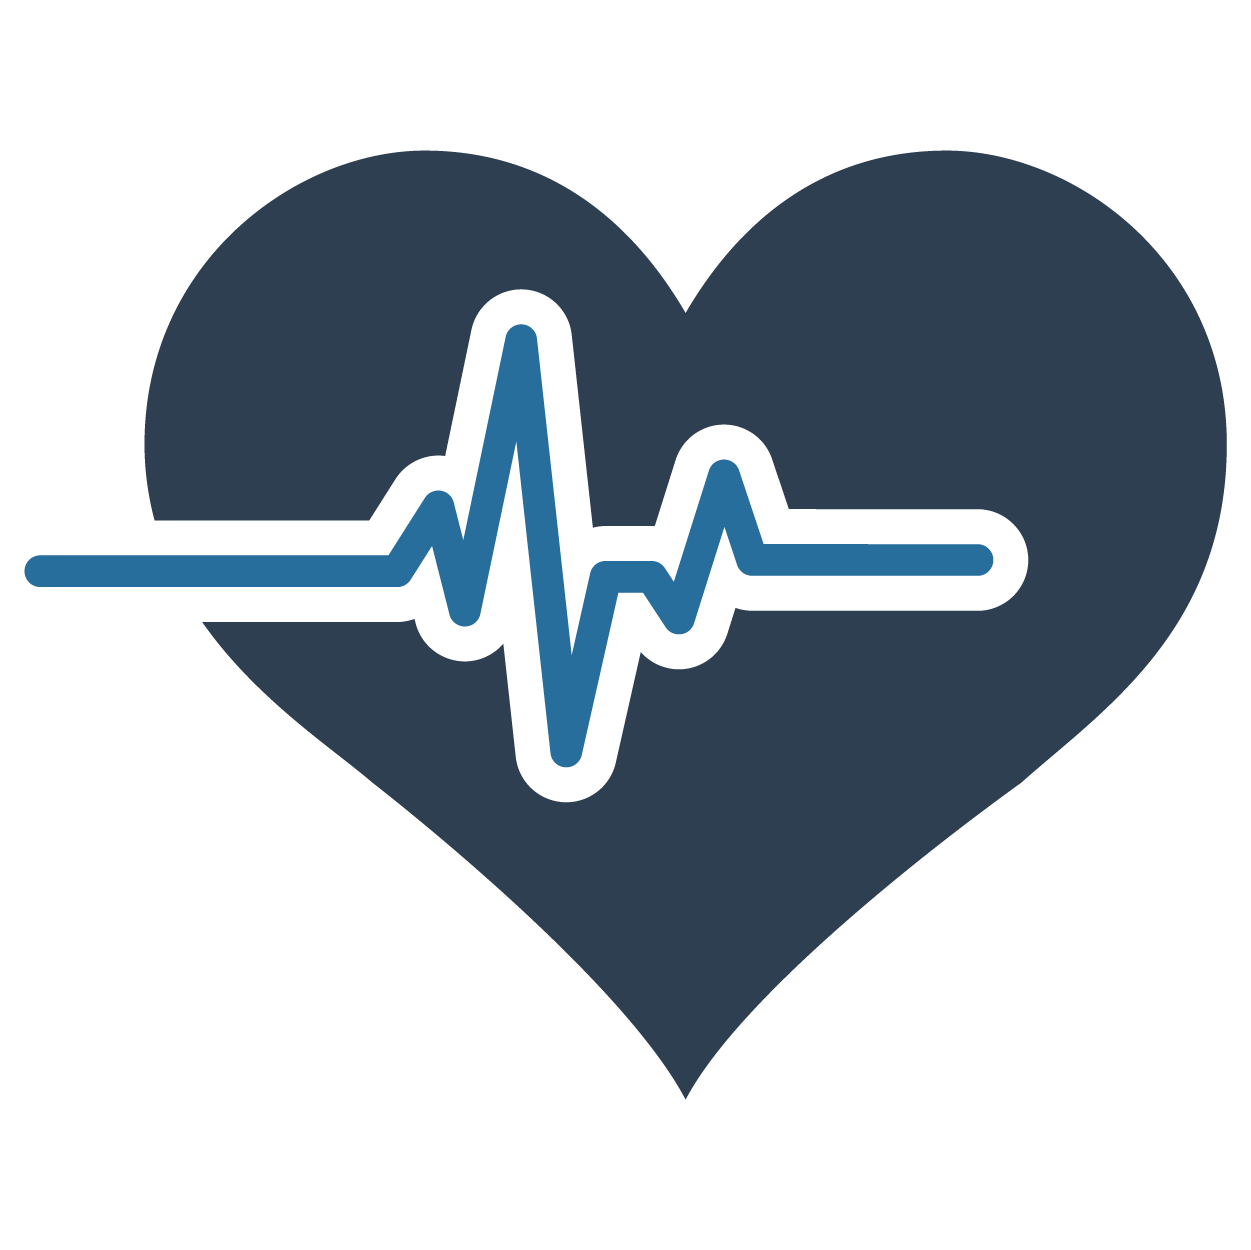 Icon of a dark blue heart shape with a lighter blue heartbeat monitor line running through the middle of it